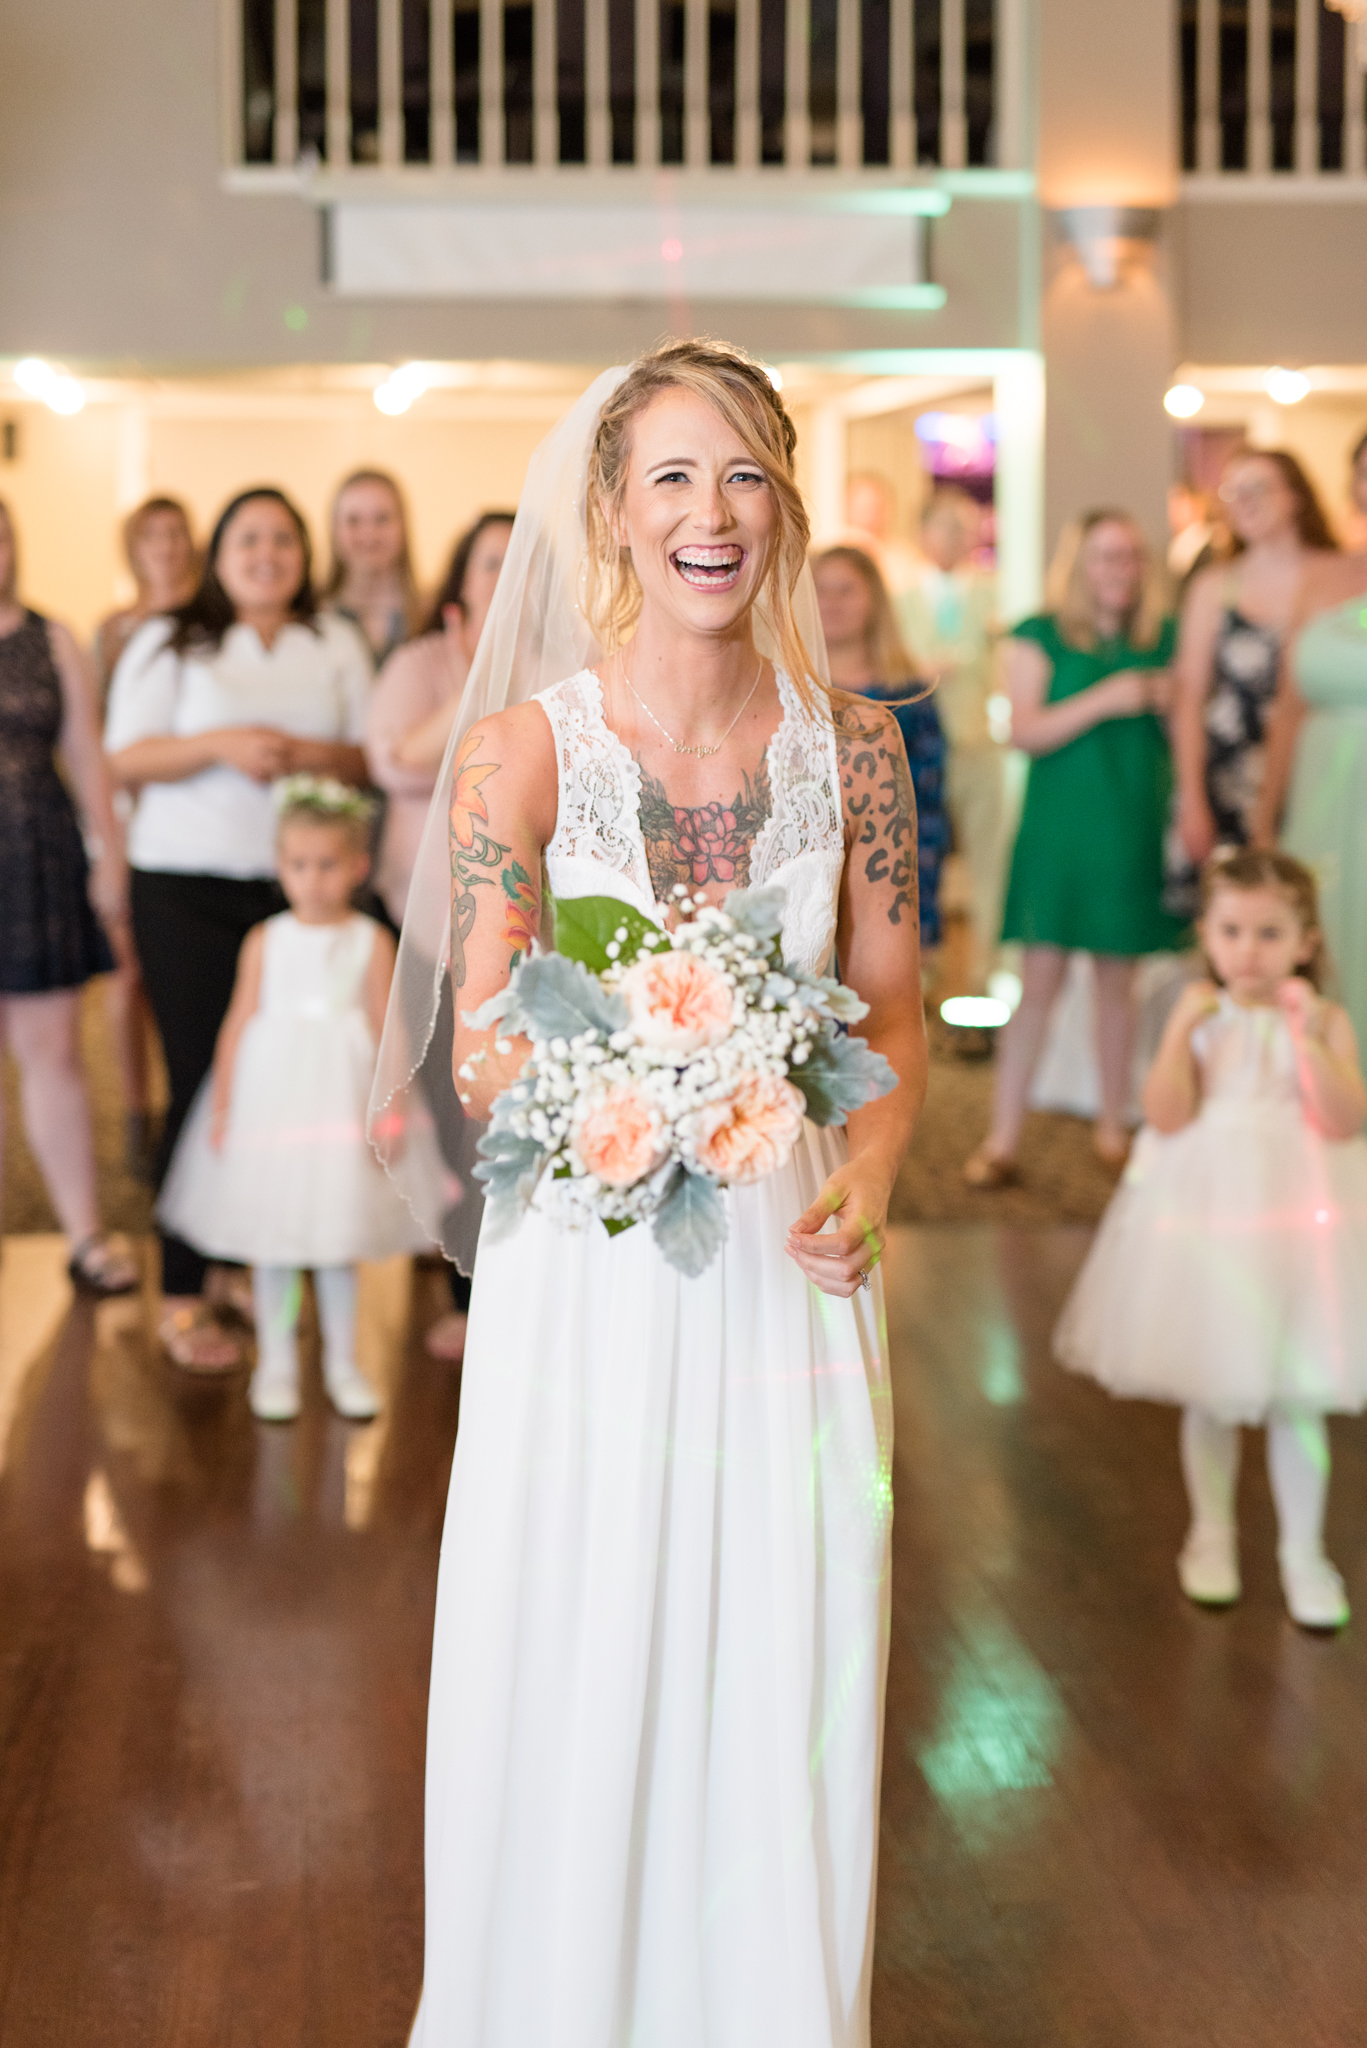 Bride smiles while tossing bouquet.